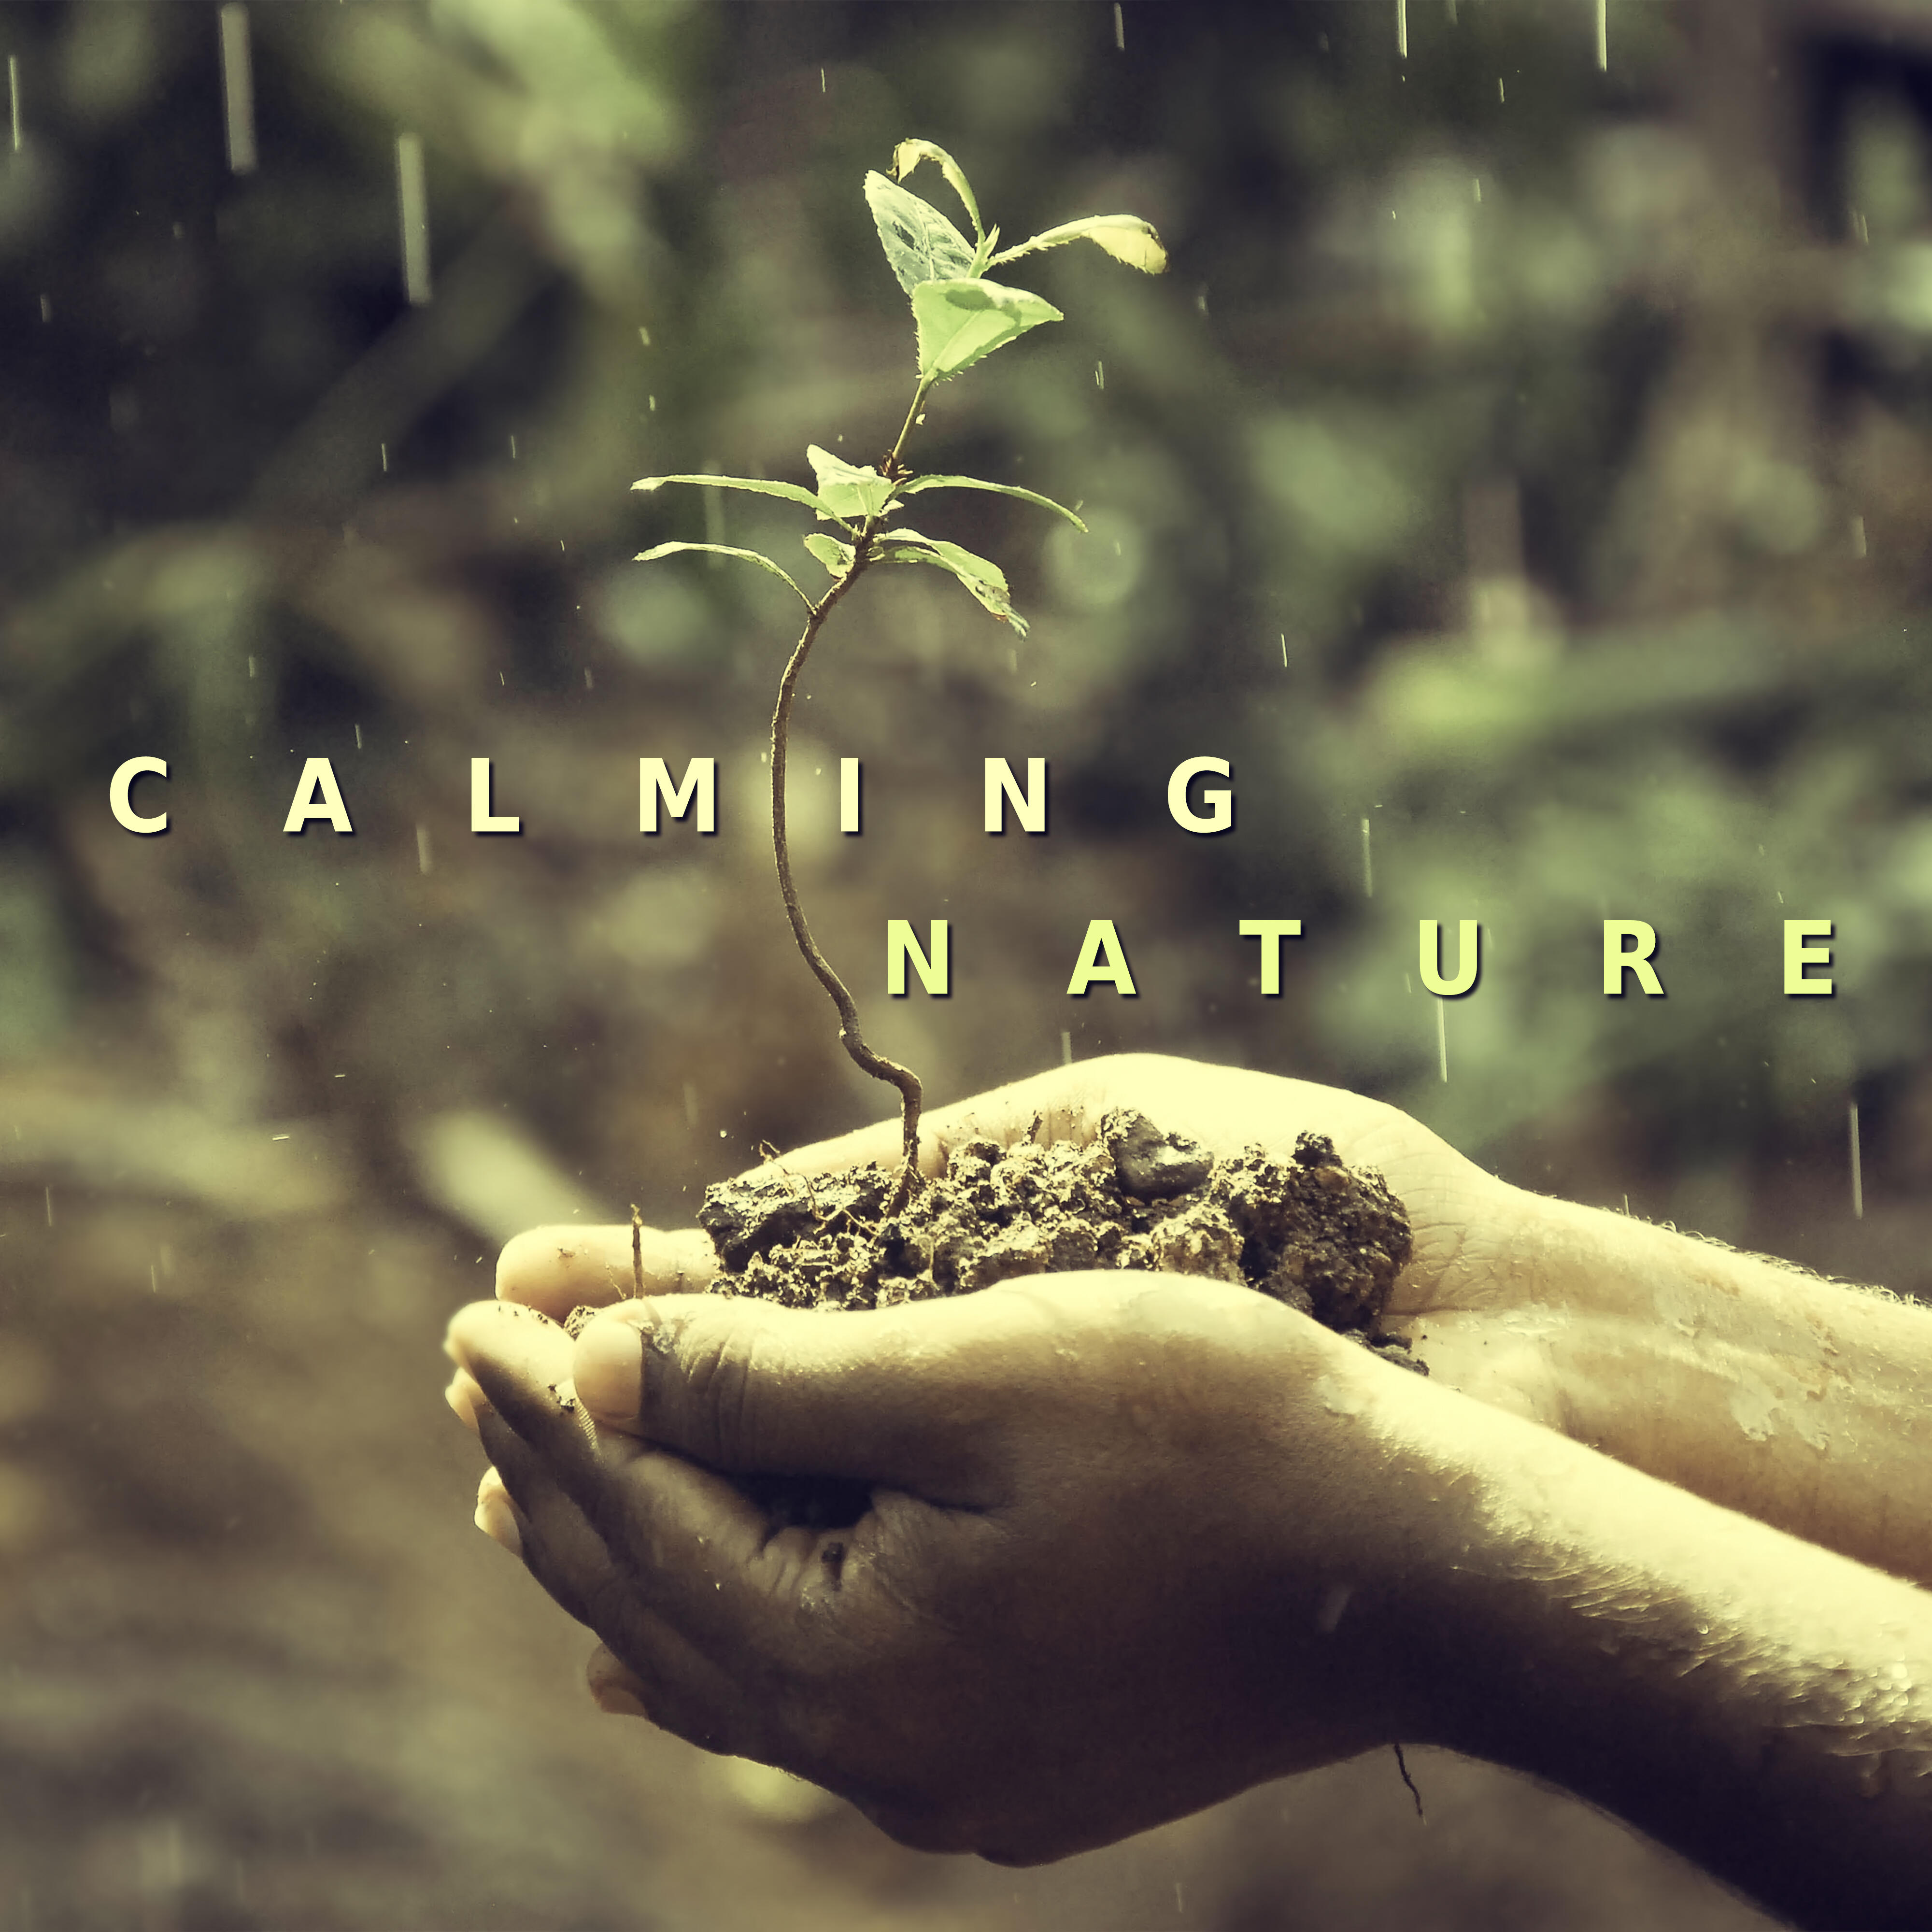 The Calming Sounds of Nature | iHeart